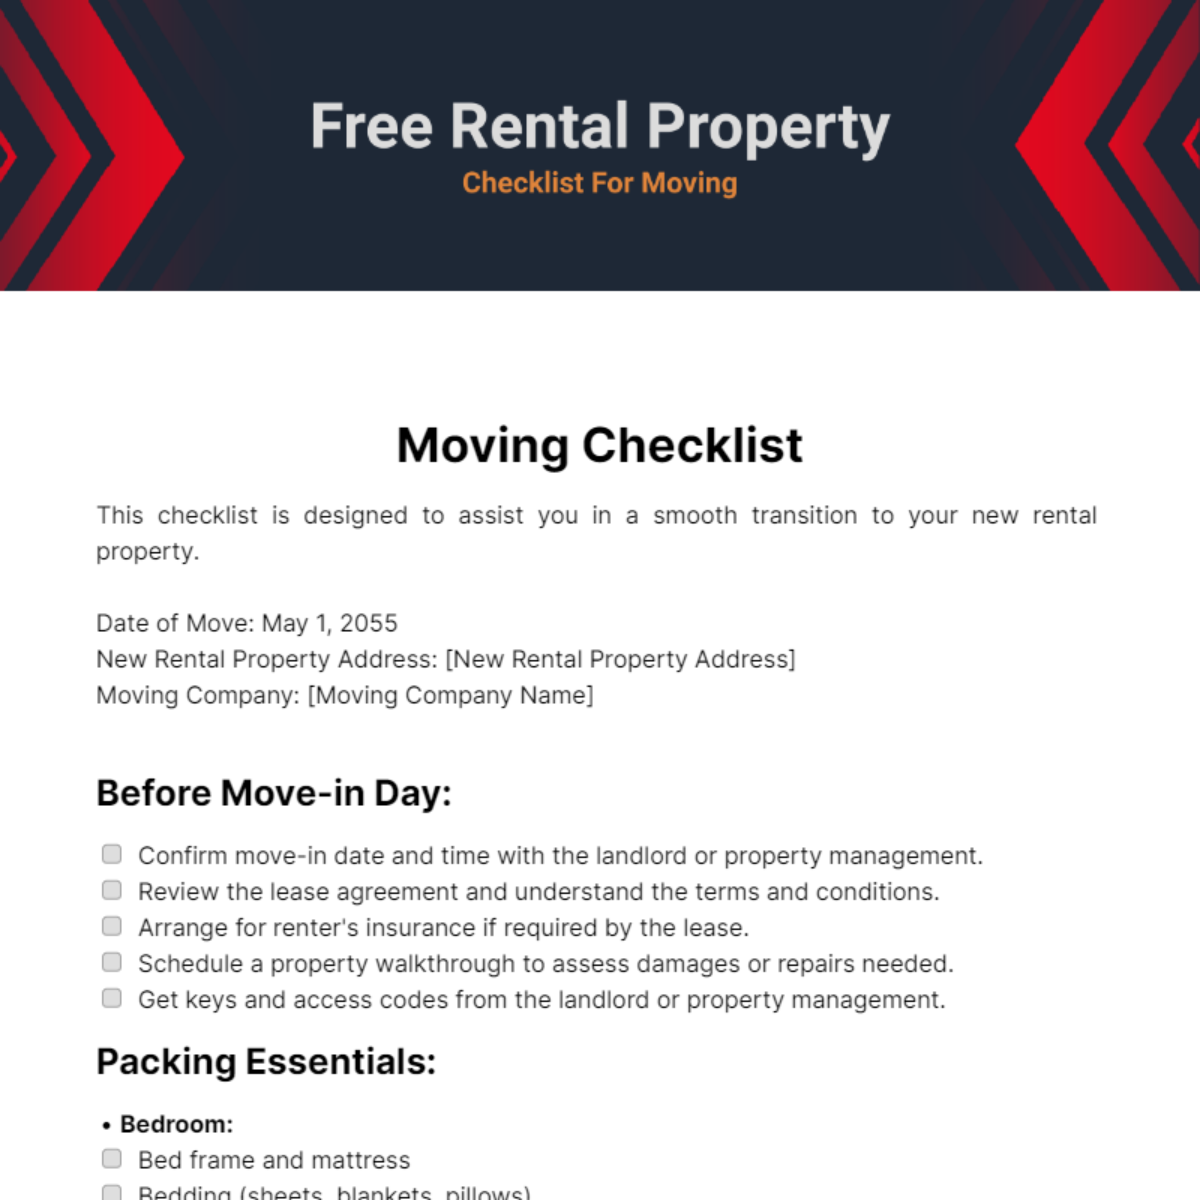 Free Rental Property Checklist For Moving In Template